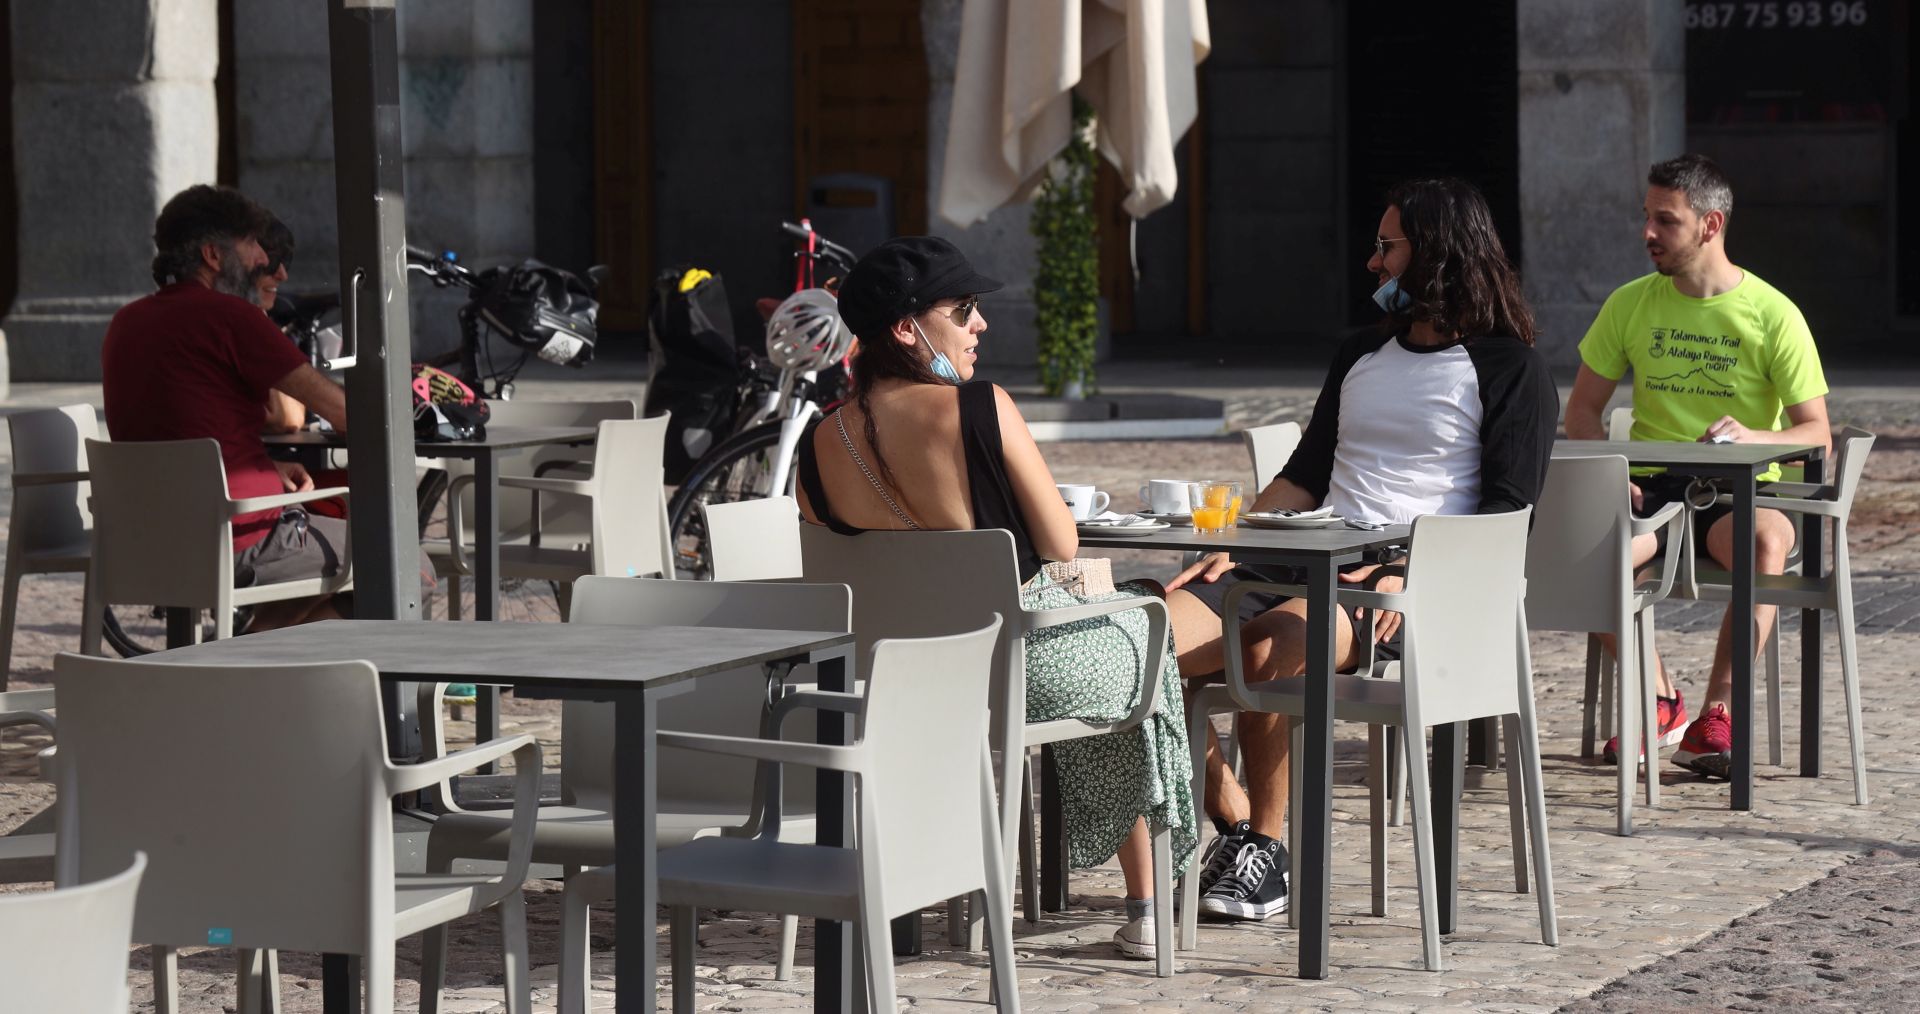 epa08442377 Customers enjoy sitting outside a bar at Plaza Mayor, Madrid, Spain, 25 May 2020. Madrid, Barcelona and Castile and Leon entered Phase 1 of the coronavirus emergency on 25 May while the rest of the country is currently on Phase 2.  EPA/KIKO HUESCA